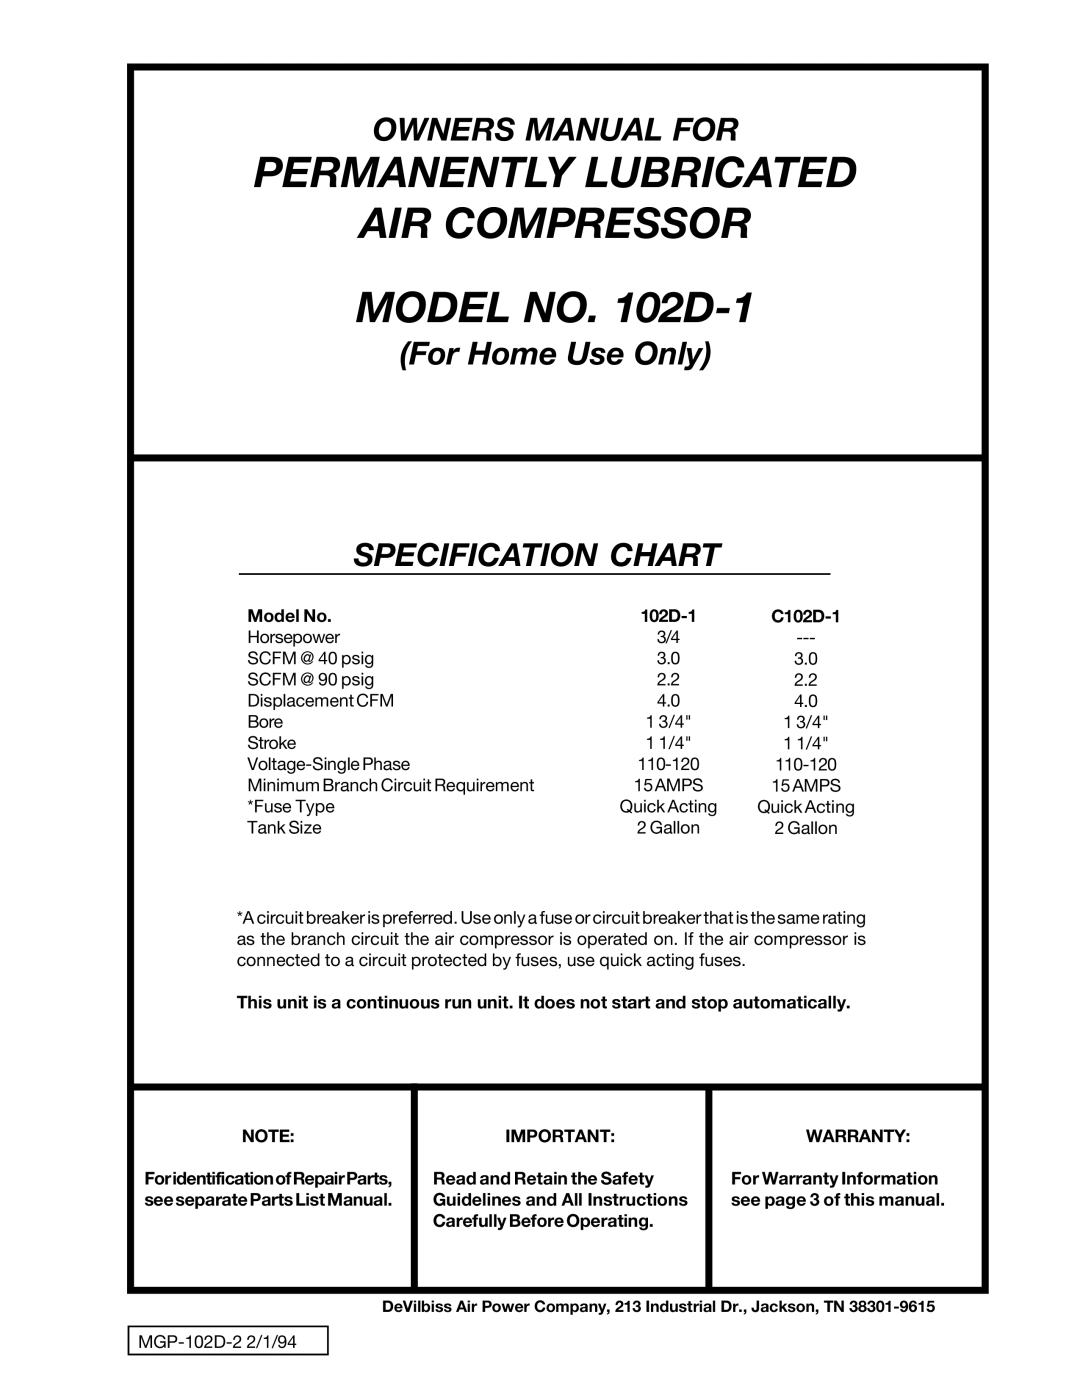 DeVillbiss Air Power Company MGP-102D-2, C102D-1 owner manual Specification Chart, Warranty 